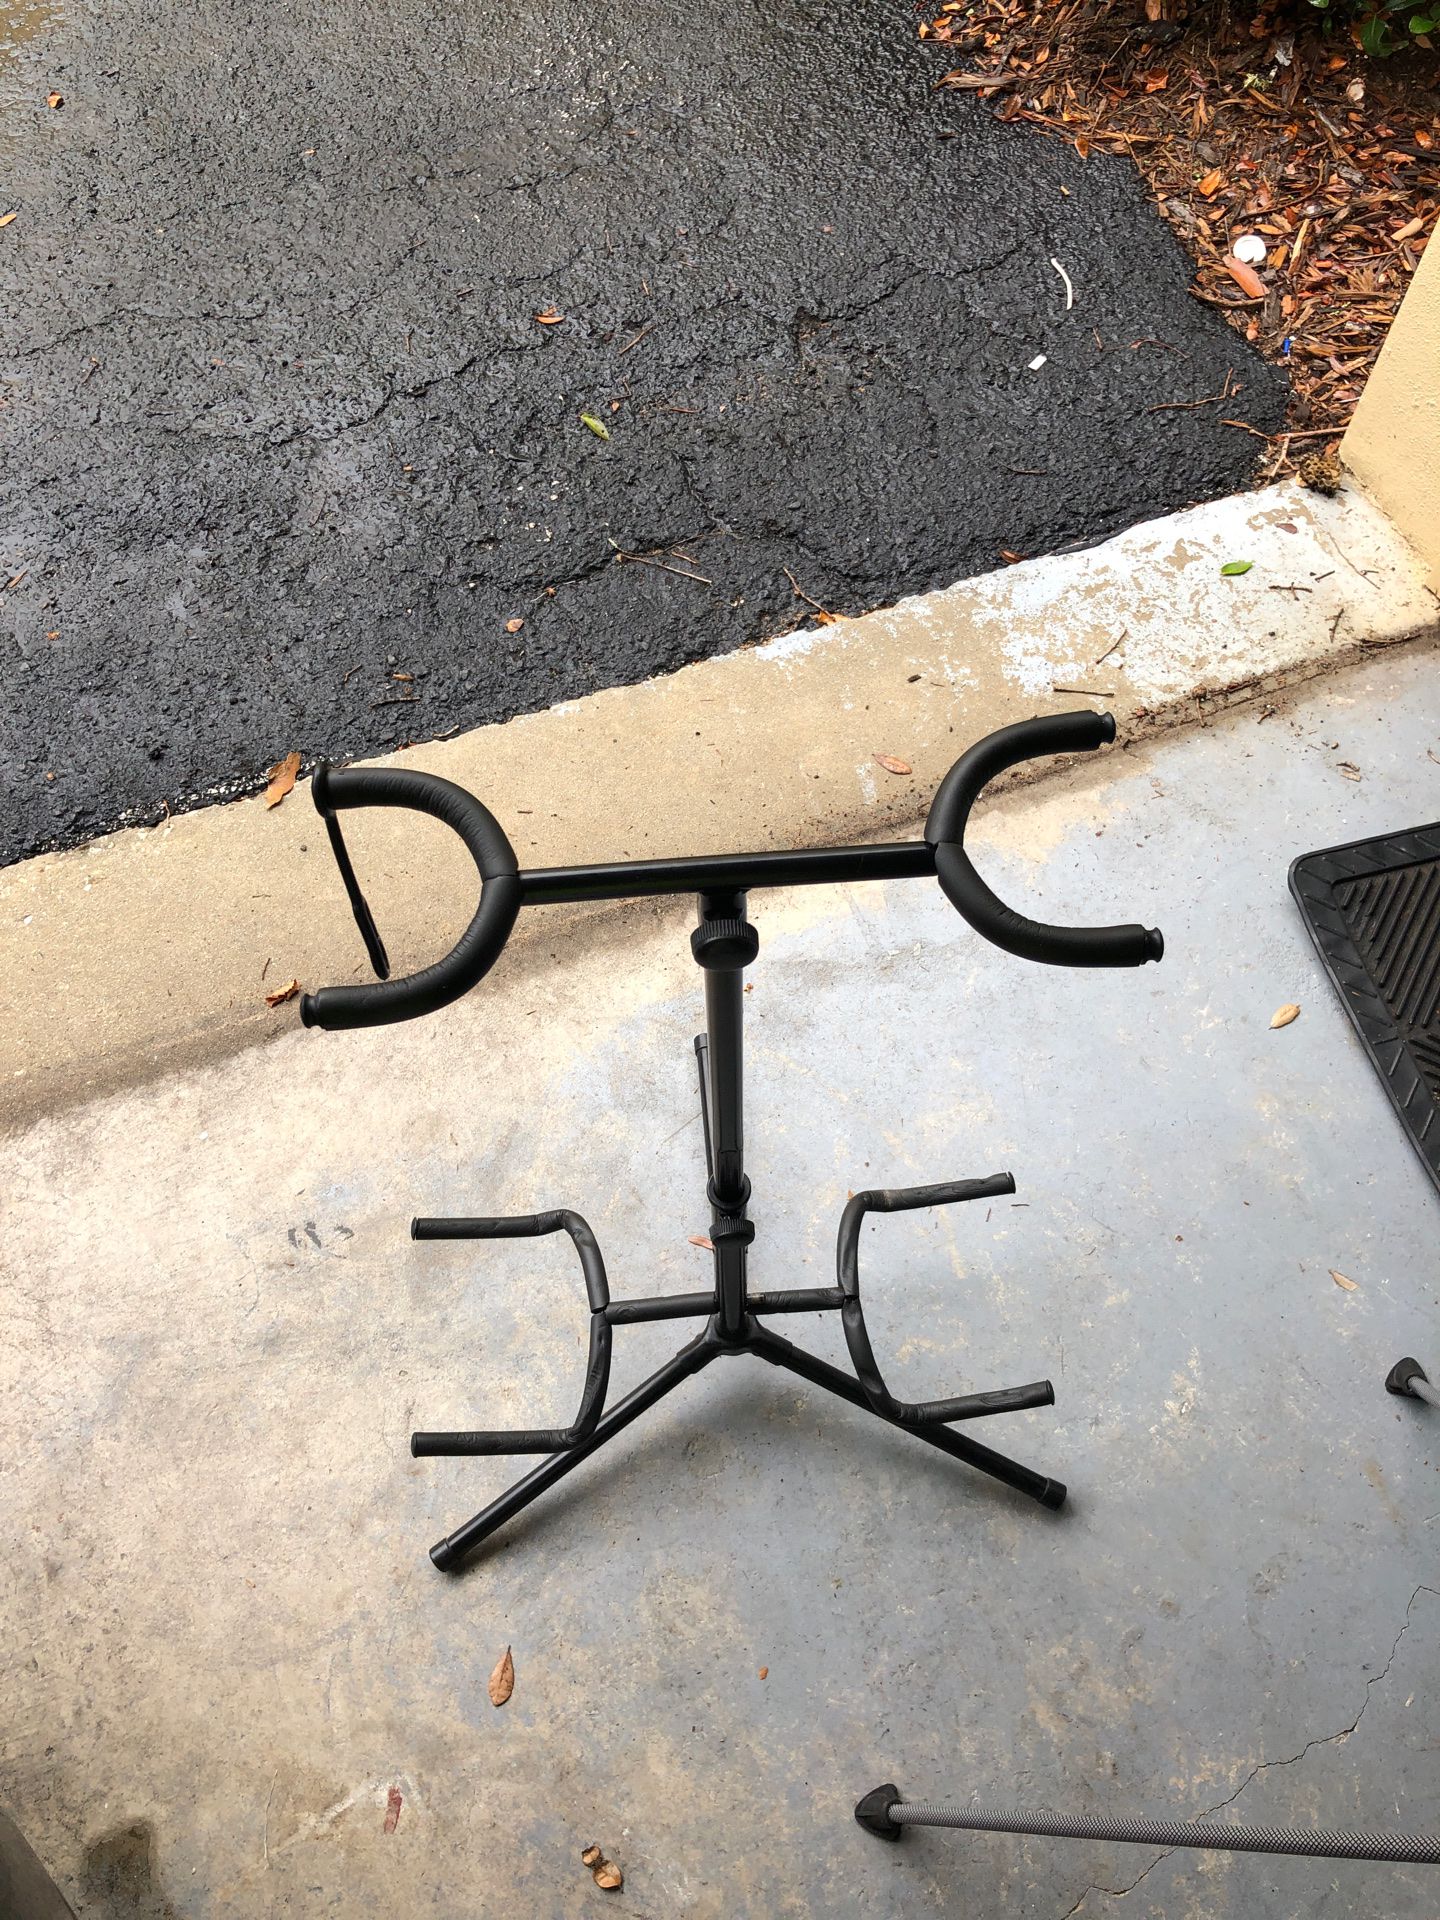 Two guitar stand display